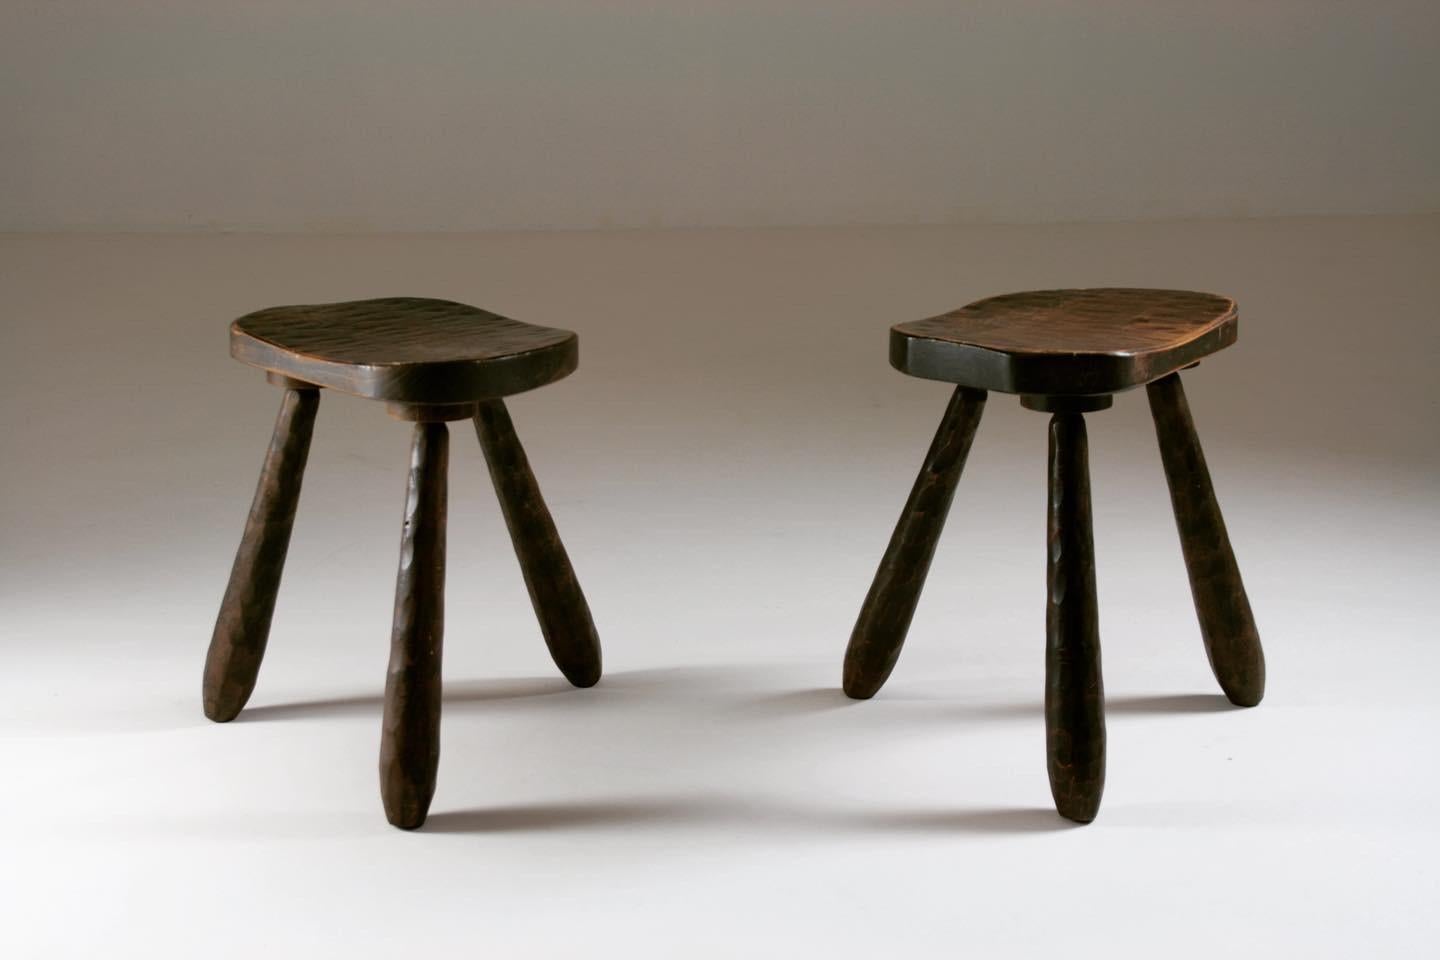 Pair of brutalist wooden tripod stools. French work dating from the 30s and 40s. Pretty, perfectly stable decorative pieces. Dimensions: D38 X W30 X H44 cm.